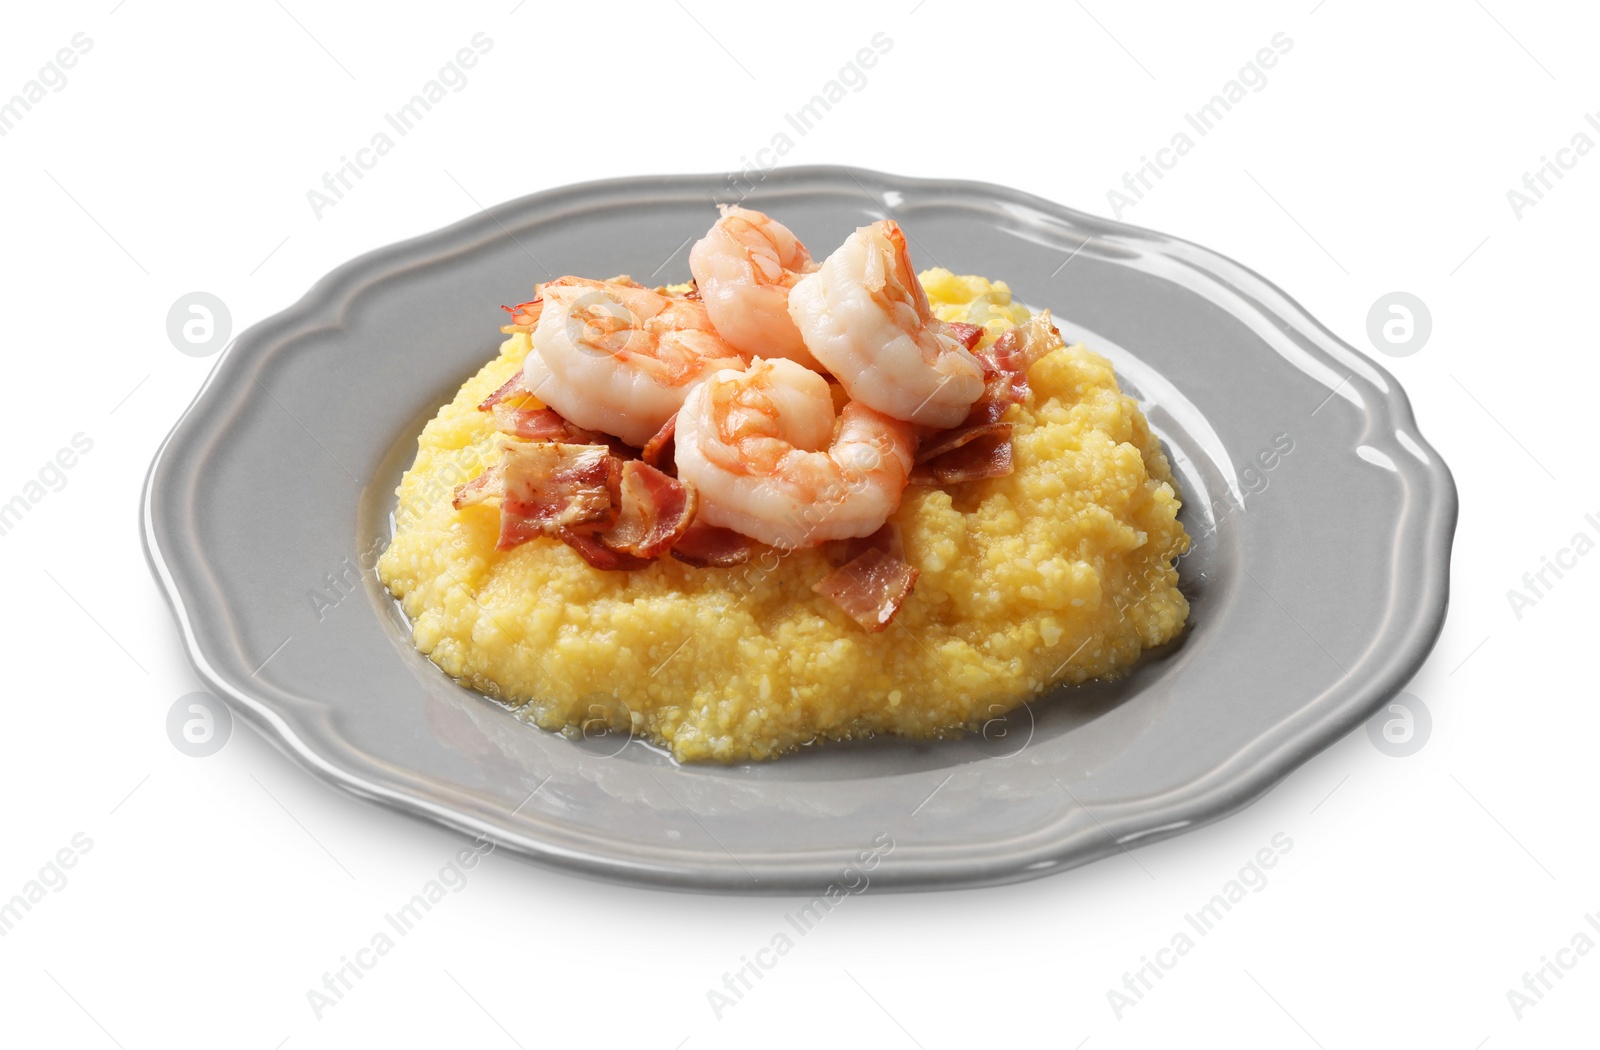 Photo of Plate with fresh tasty shrimps, bacon and grits isolated on white